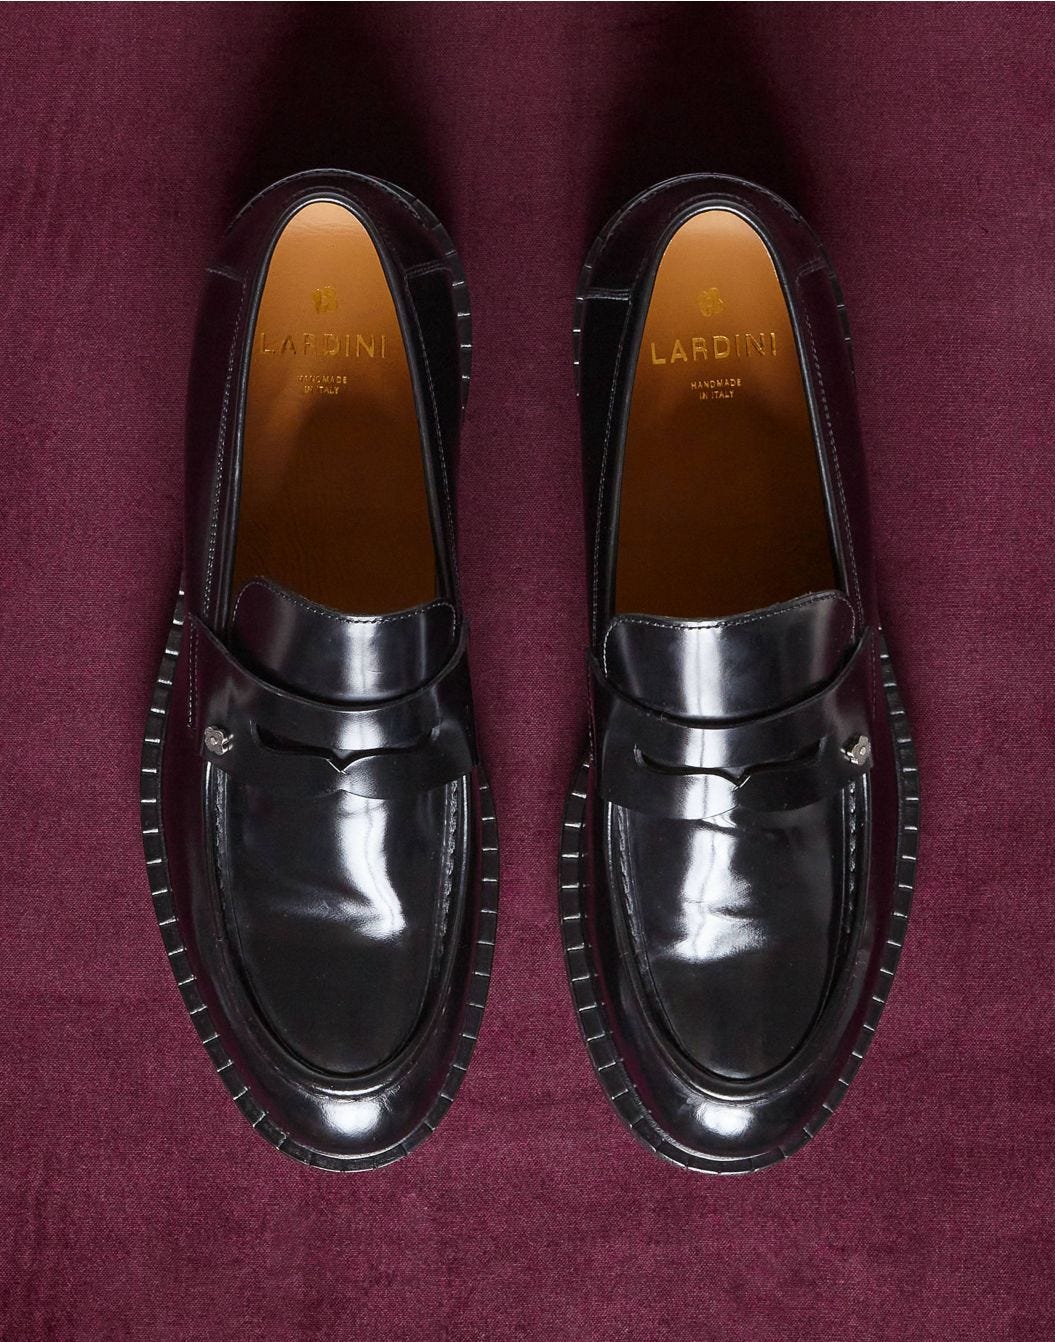 Black calfskin loafers with an apron.